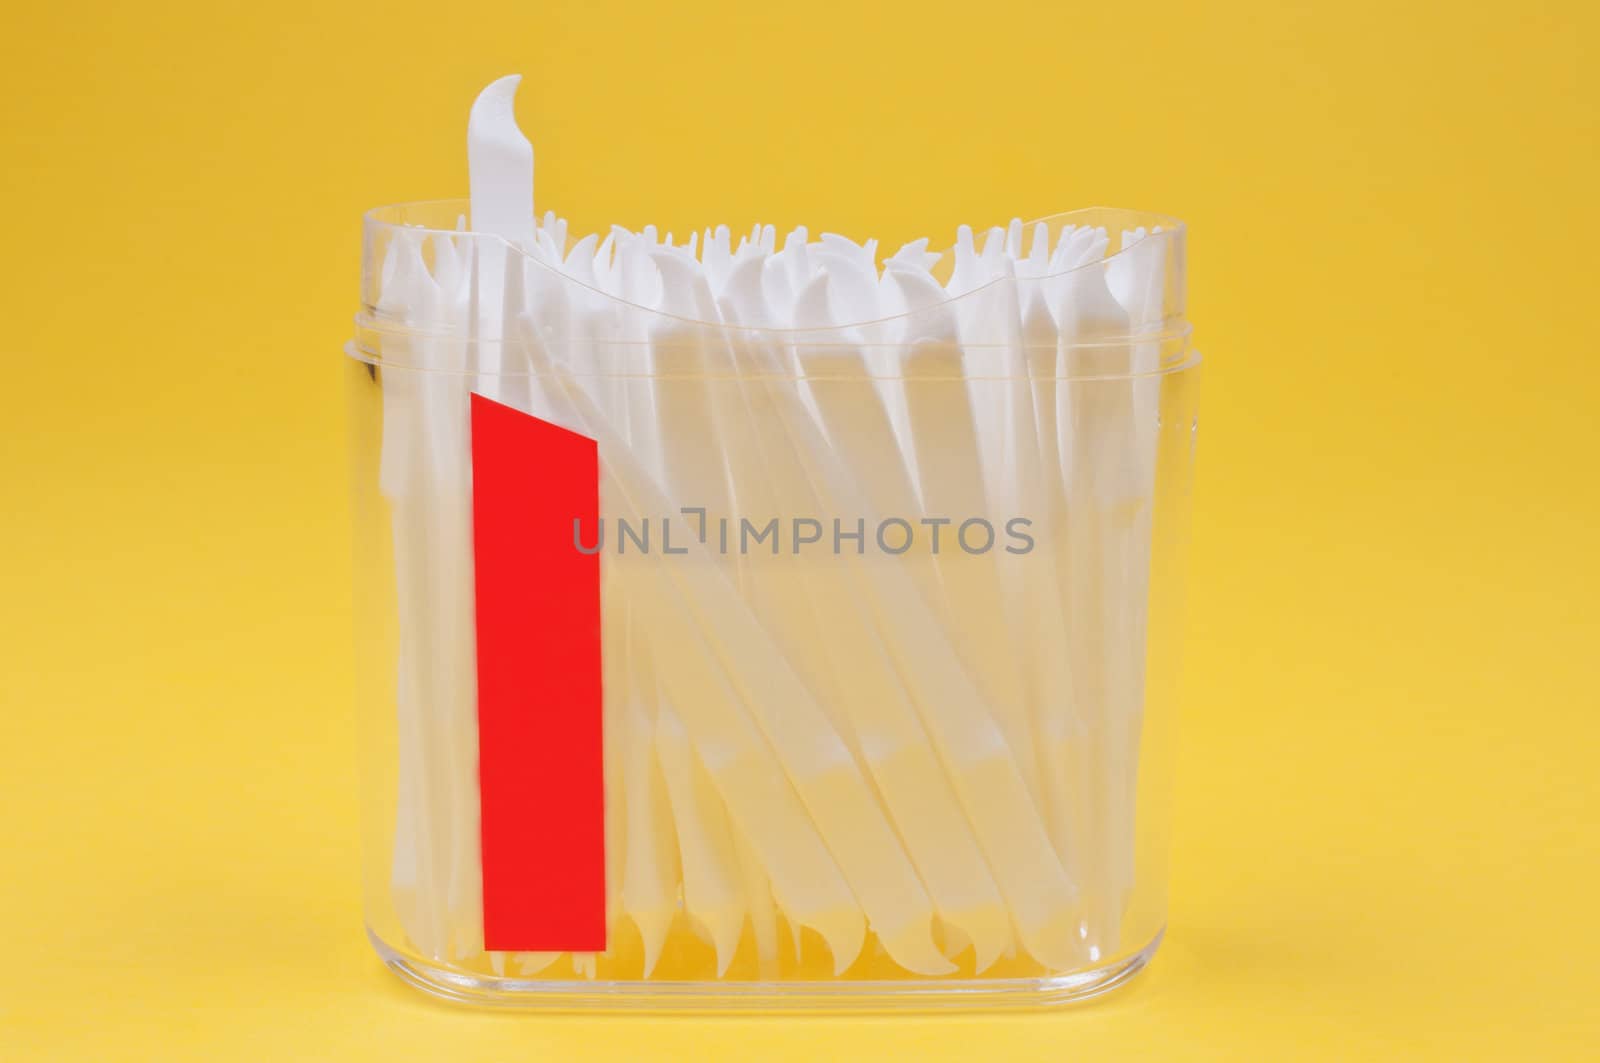 Toothpicks in clear plastic container on yellow background